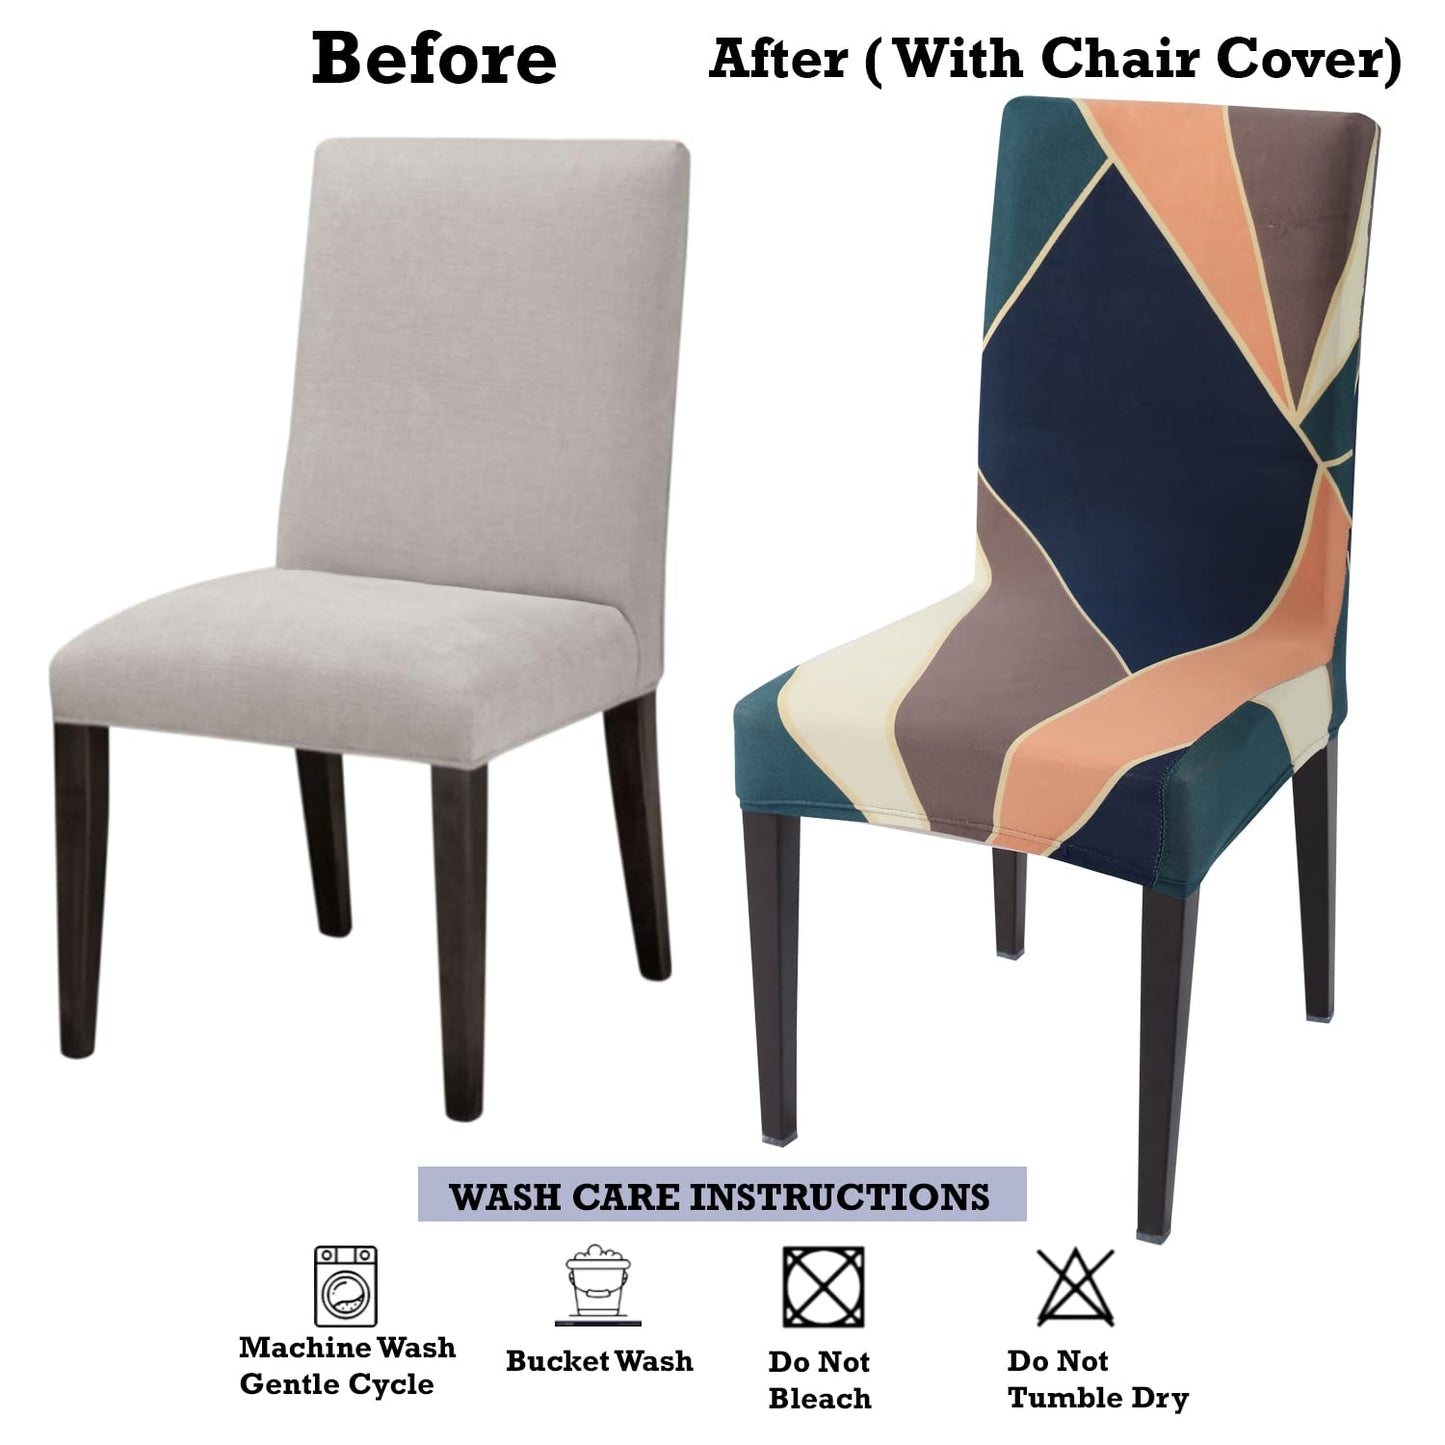 STRETCHABLE CHAIR COVERS, MULTI COLOR PRISM - Fab Home Decor - Sofa Cover